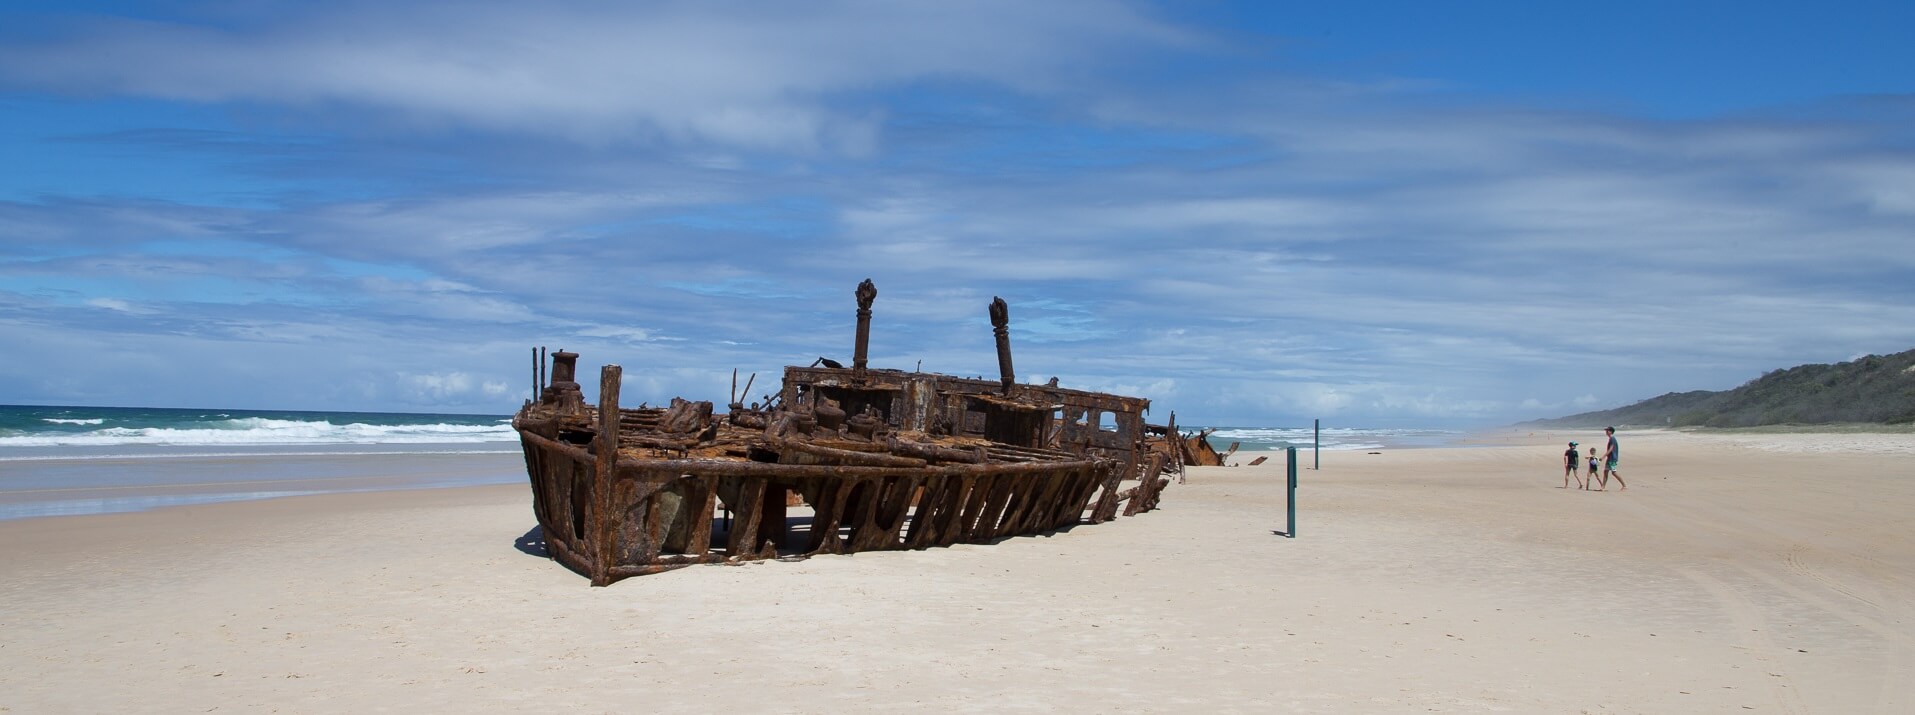 What are the stories behind Fraser Island’s Shipwrecks